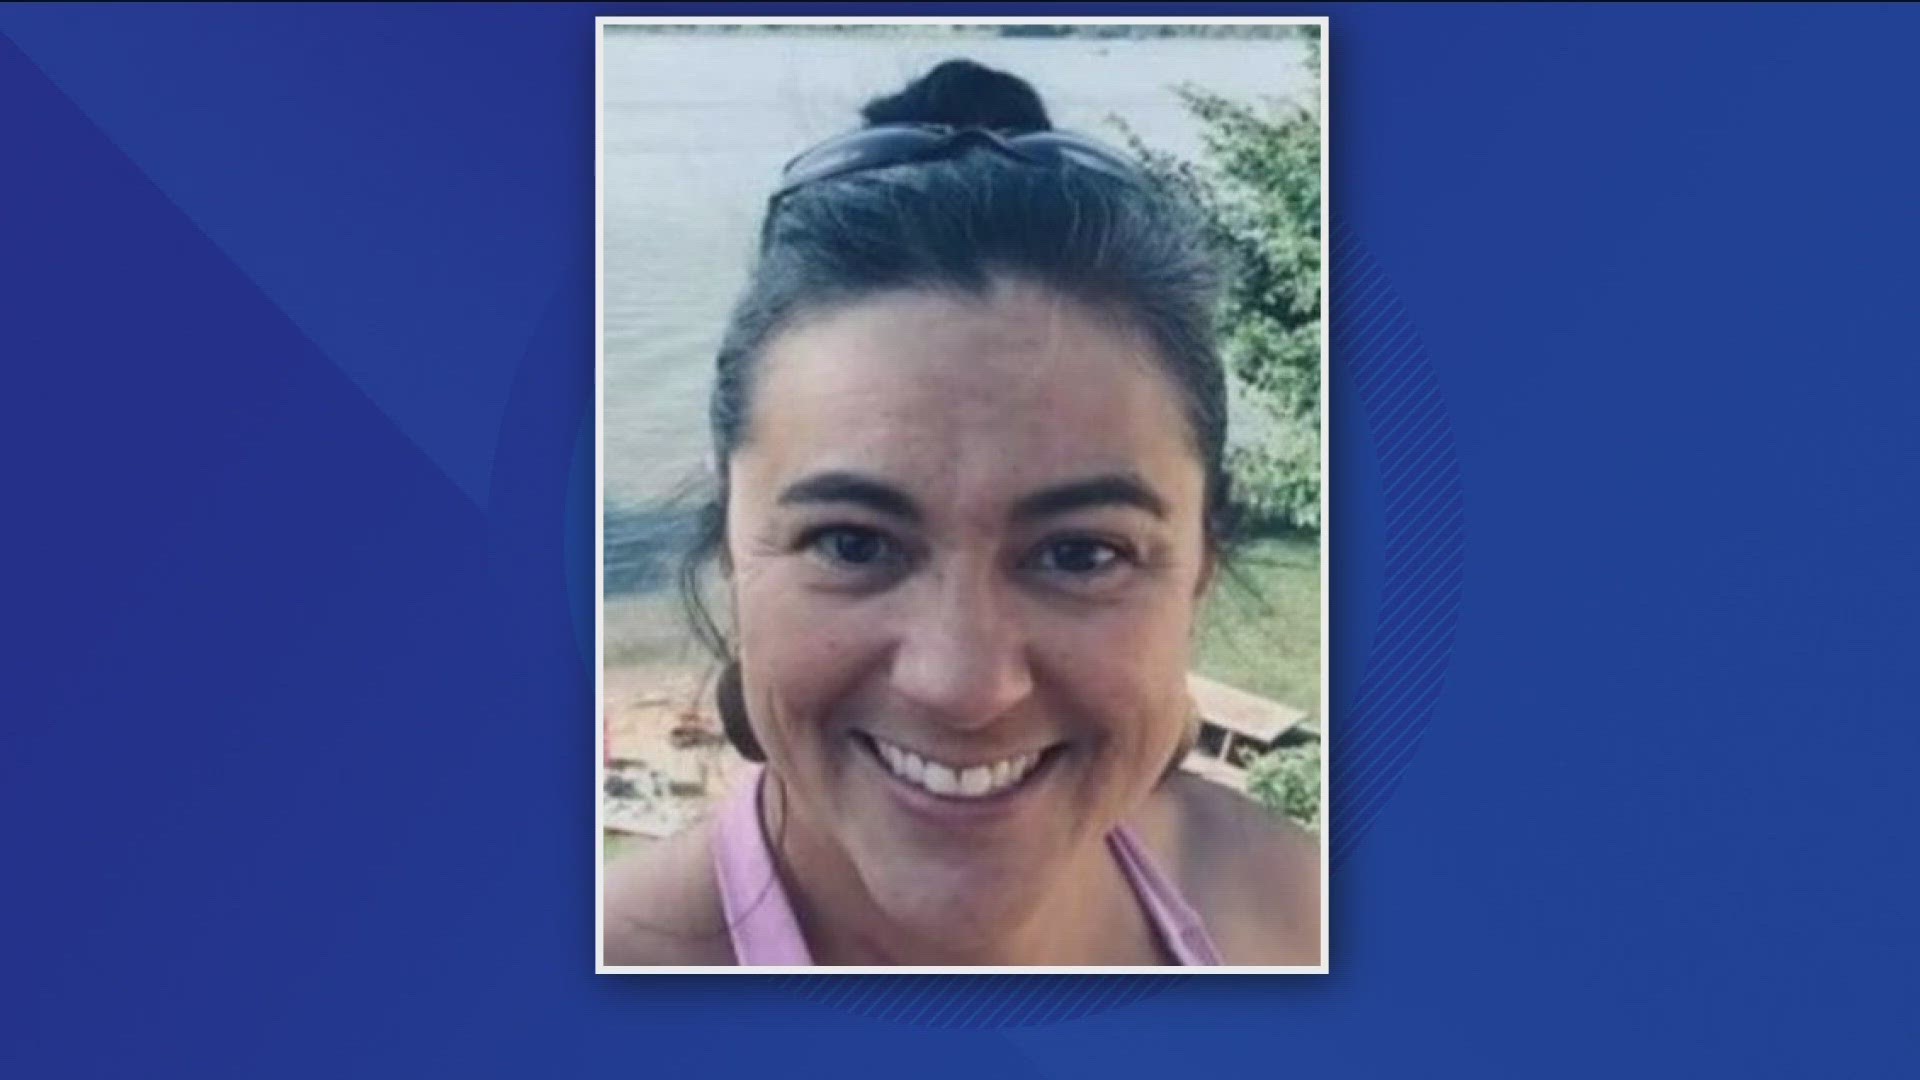 The Hawaiʻi Police Department said she was found Saturday morning in the Puna district.